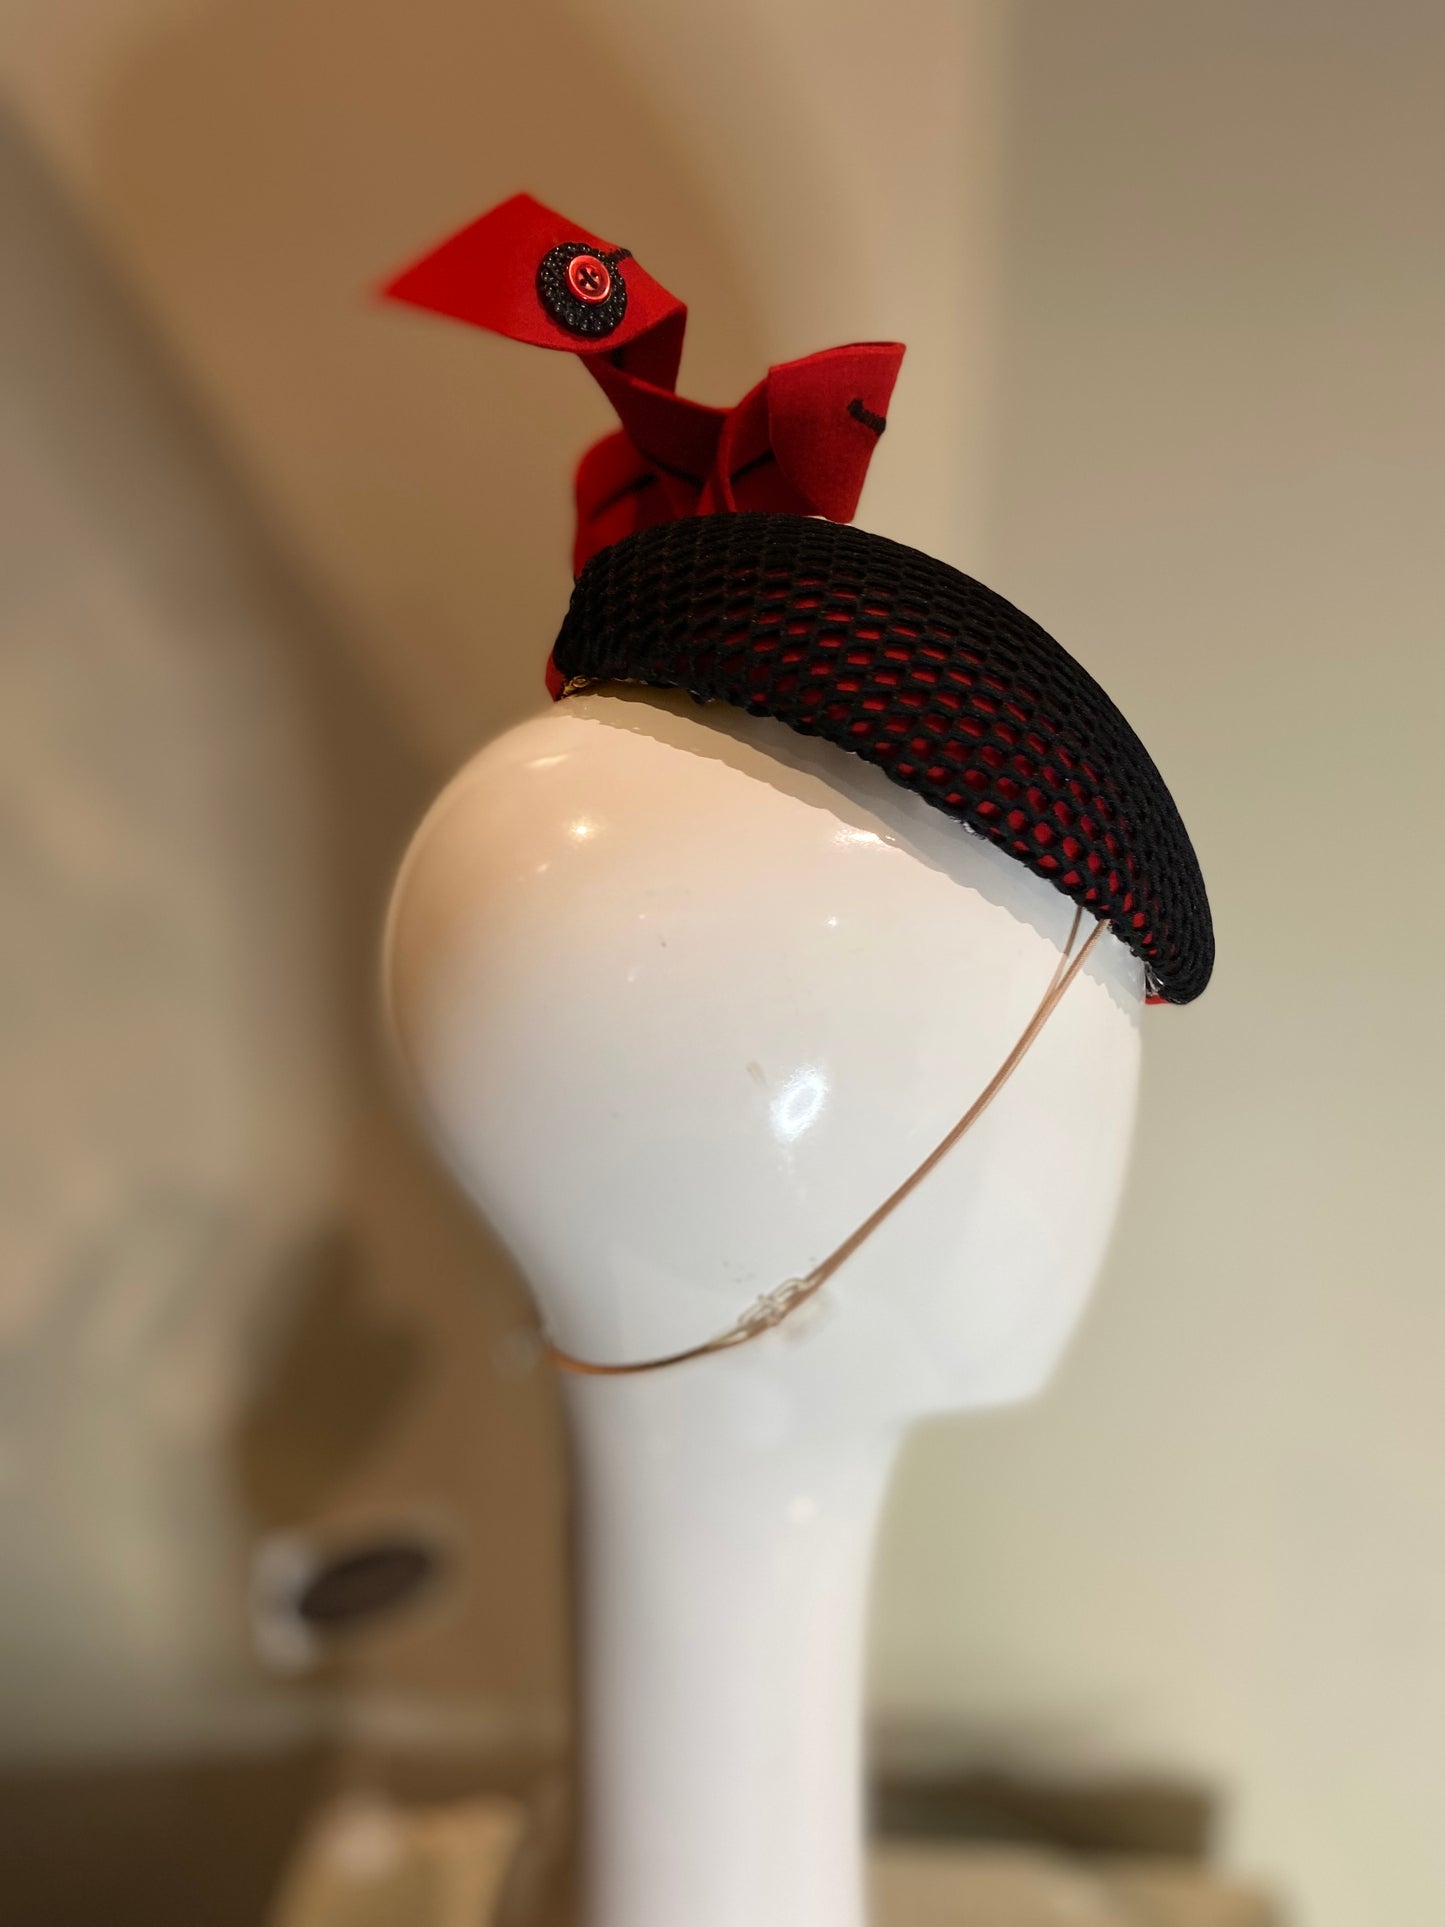 Red beret style percher with black mesh